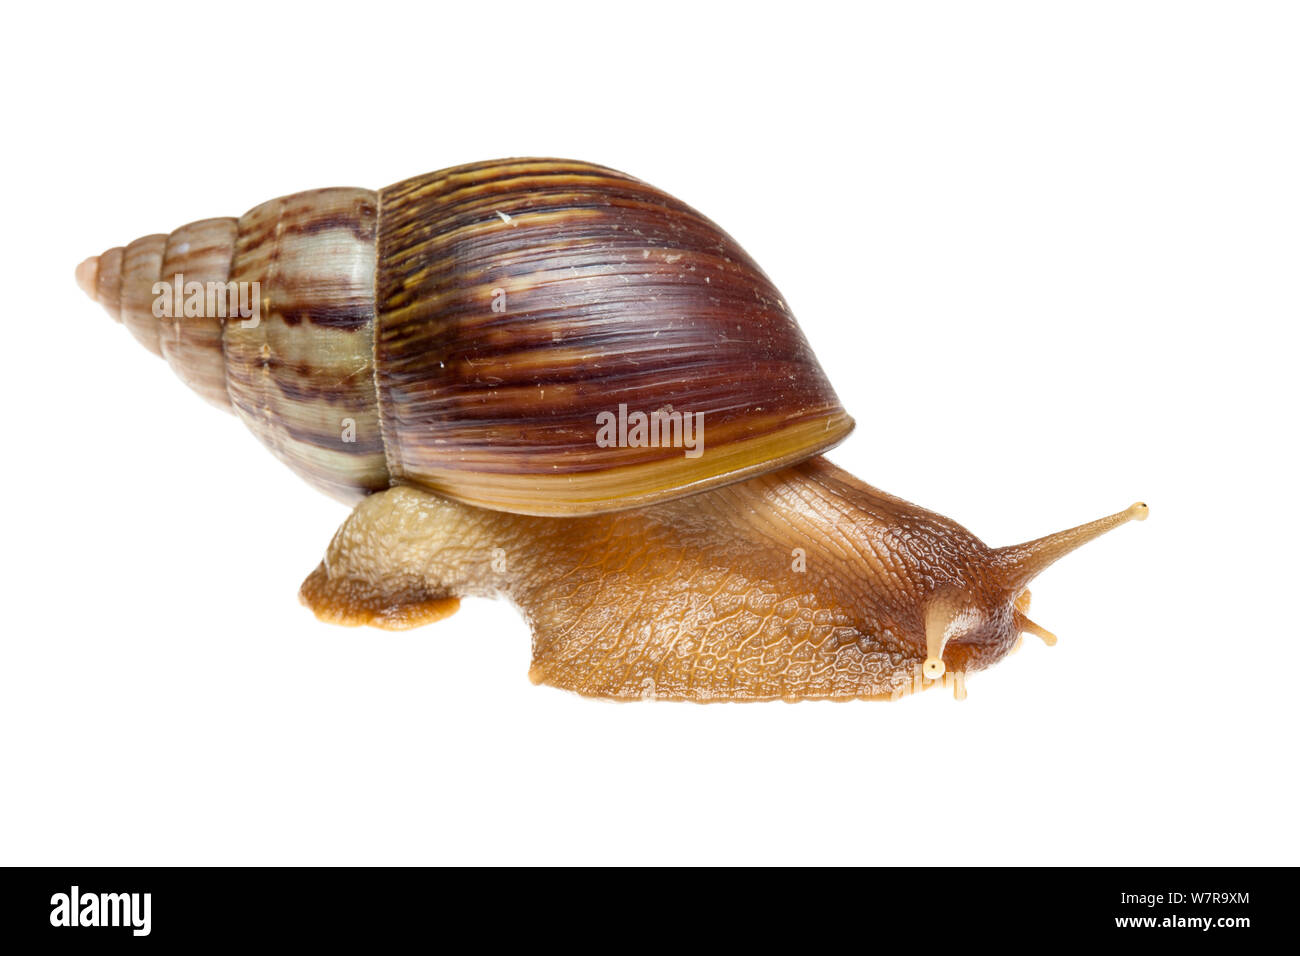 Giant African land snail (Lissachatina fulica) native to East Africa, pantropically invasive, photographed in Sabah, Borneo, Malaysia.  Meetyourneighbours.net project Stock Photo